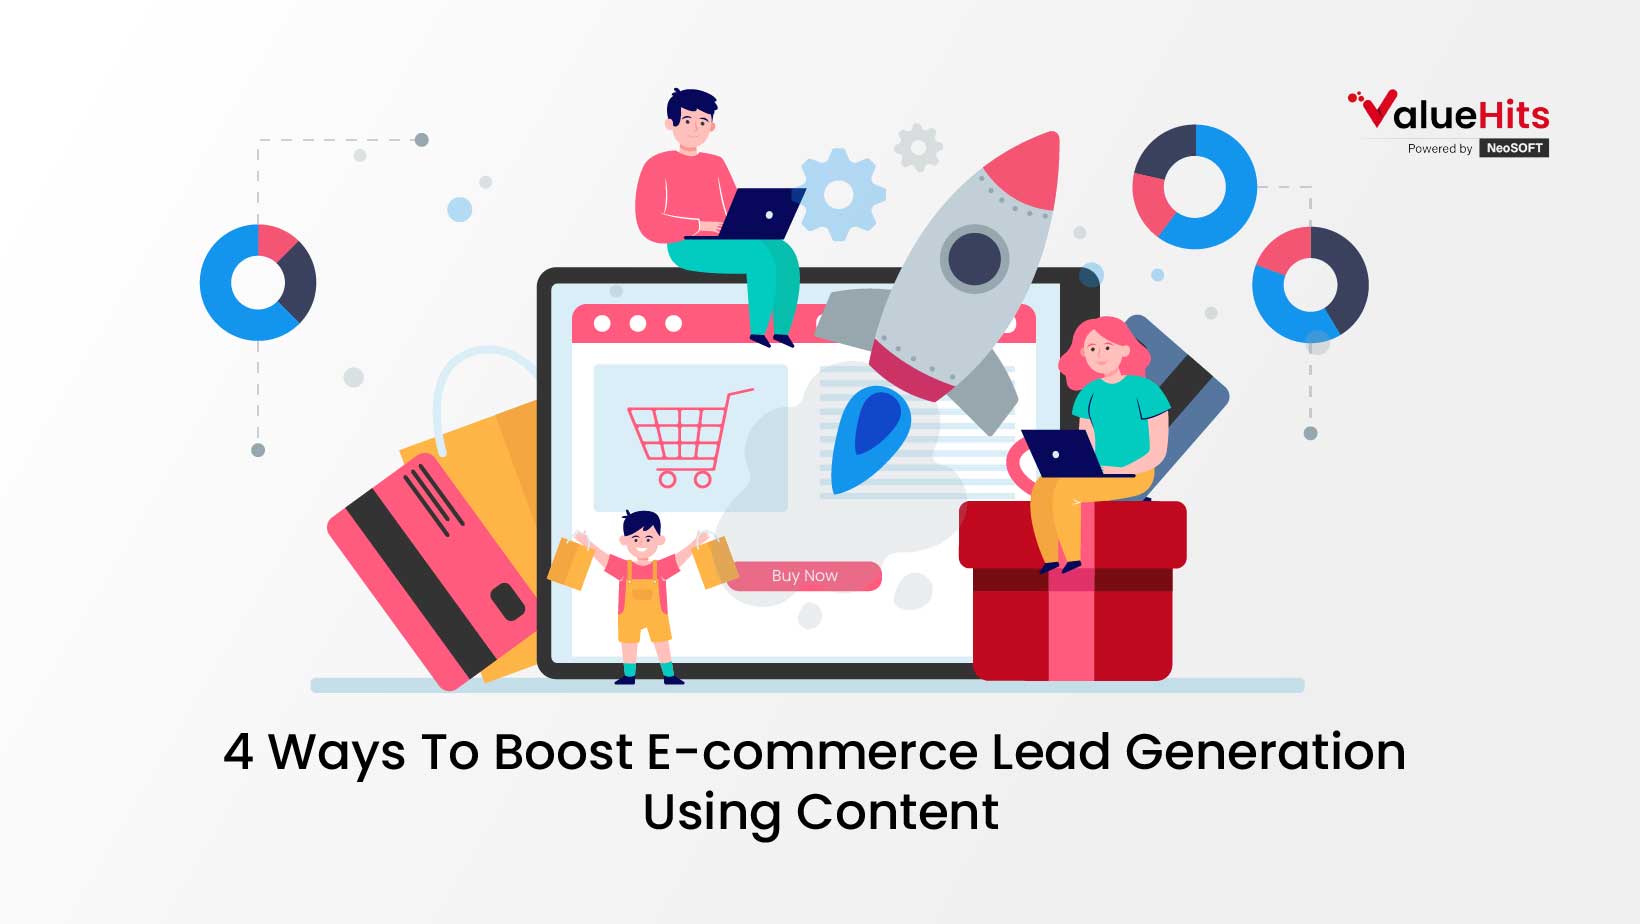 4 Ways To Boost E-commerce Lead Generation Using Content